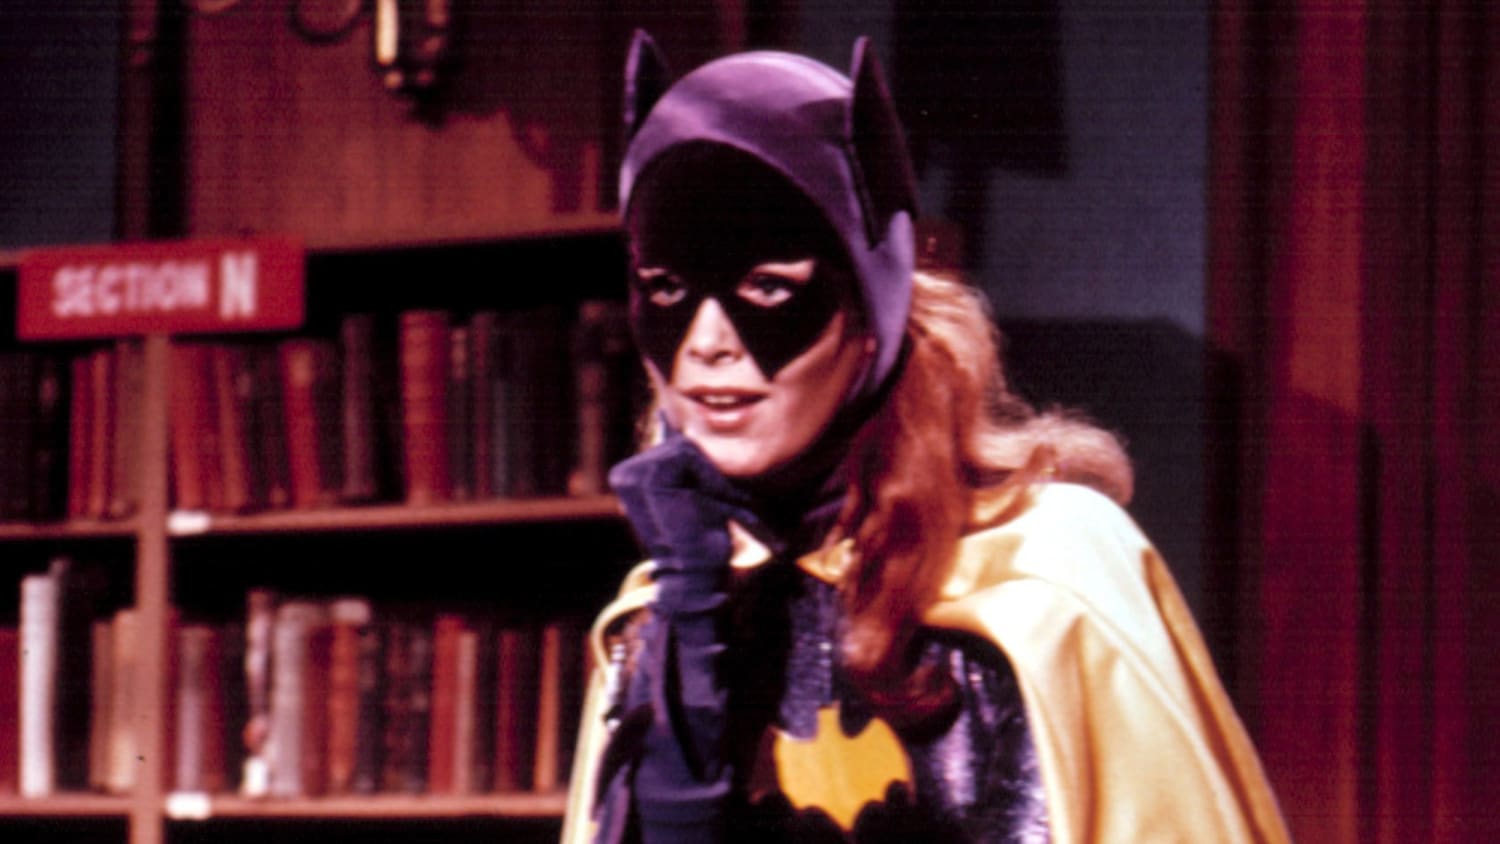 Yvonne Craig, Actress Who Played Batgirl, Is Dead at 78 - The New York Times